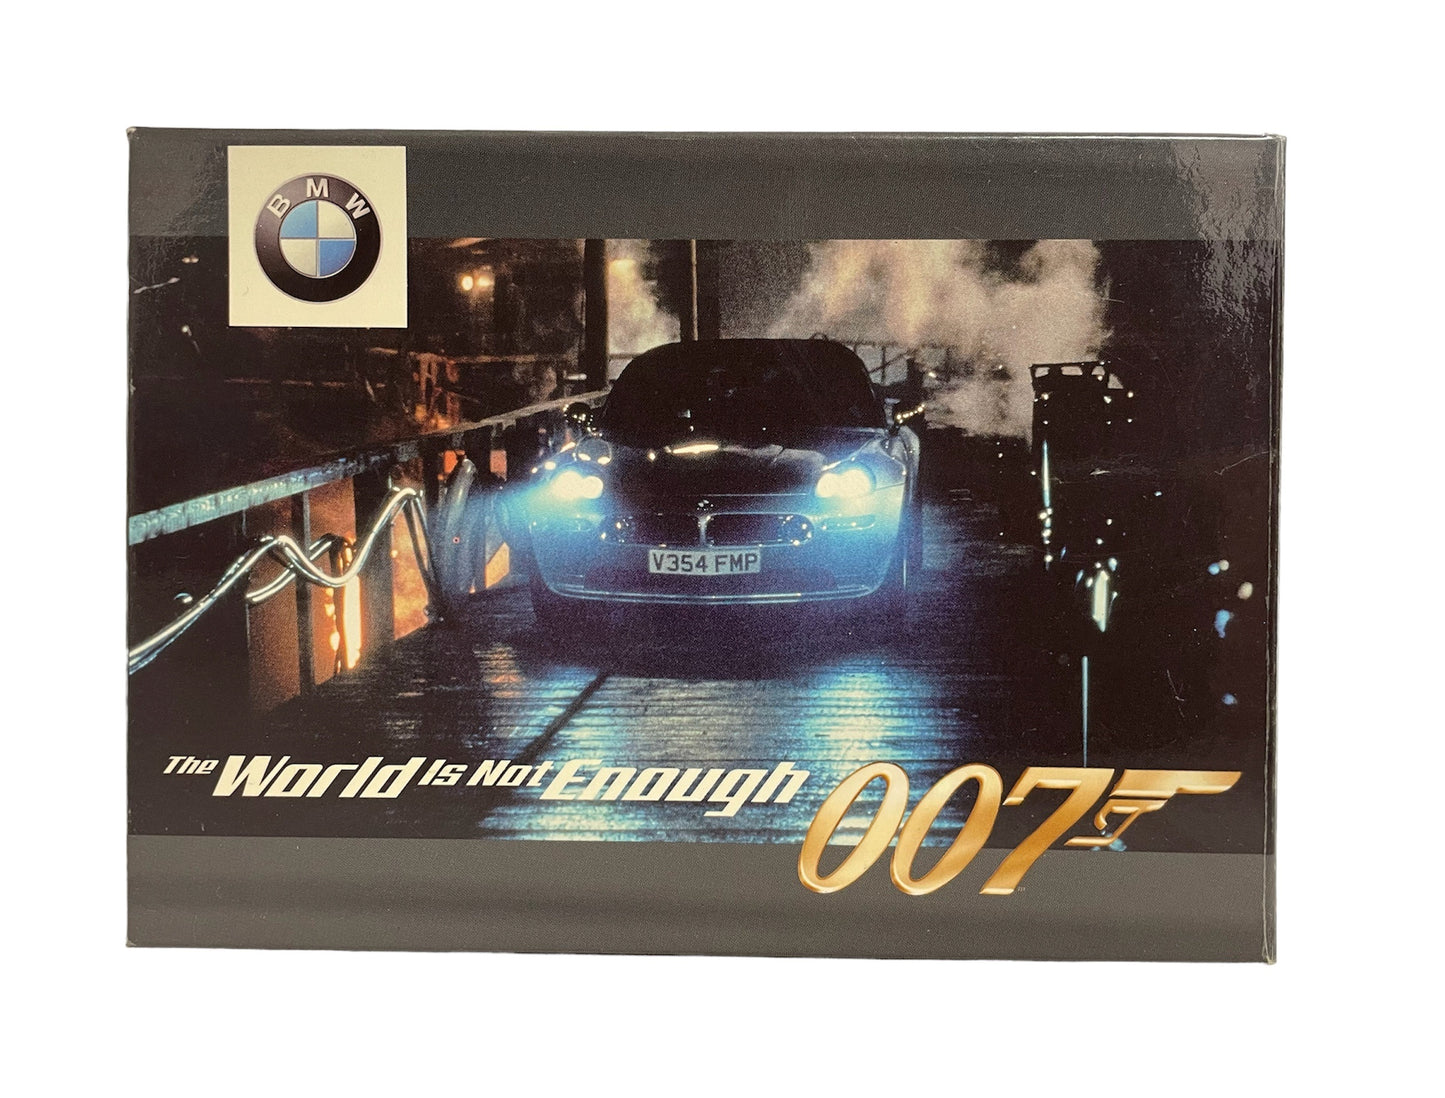 Vintage 1999 James 007 Bond The World Is Not Enough - Collectors Model - BM Z8 1:43 Scale Die-Cast W Car Vehicle Replica Model 1999 Edition On Fold Open Display Plinth